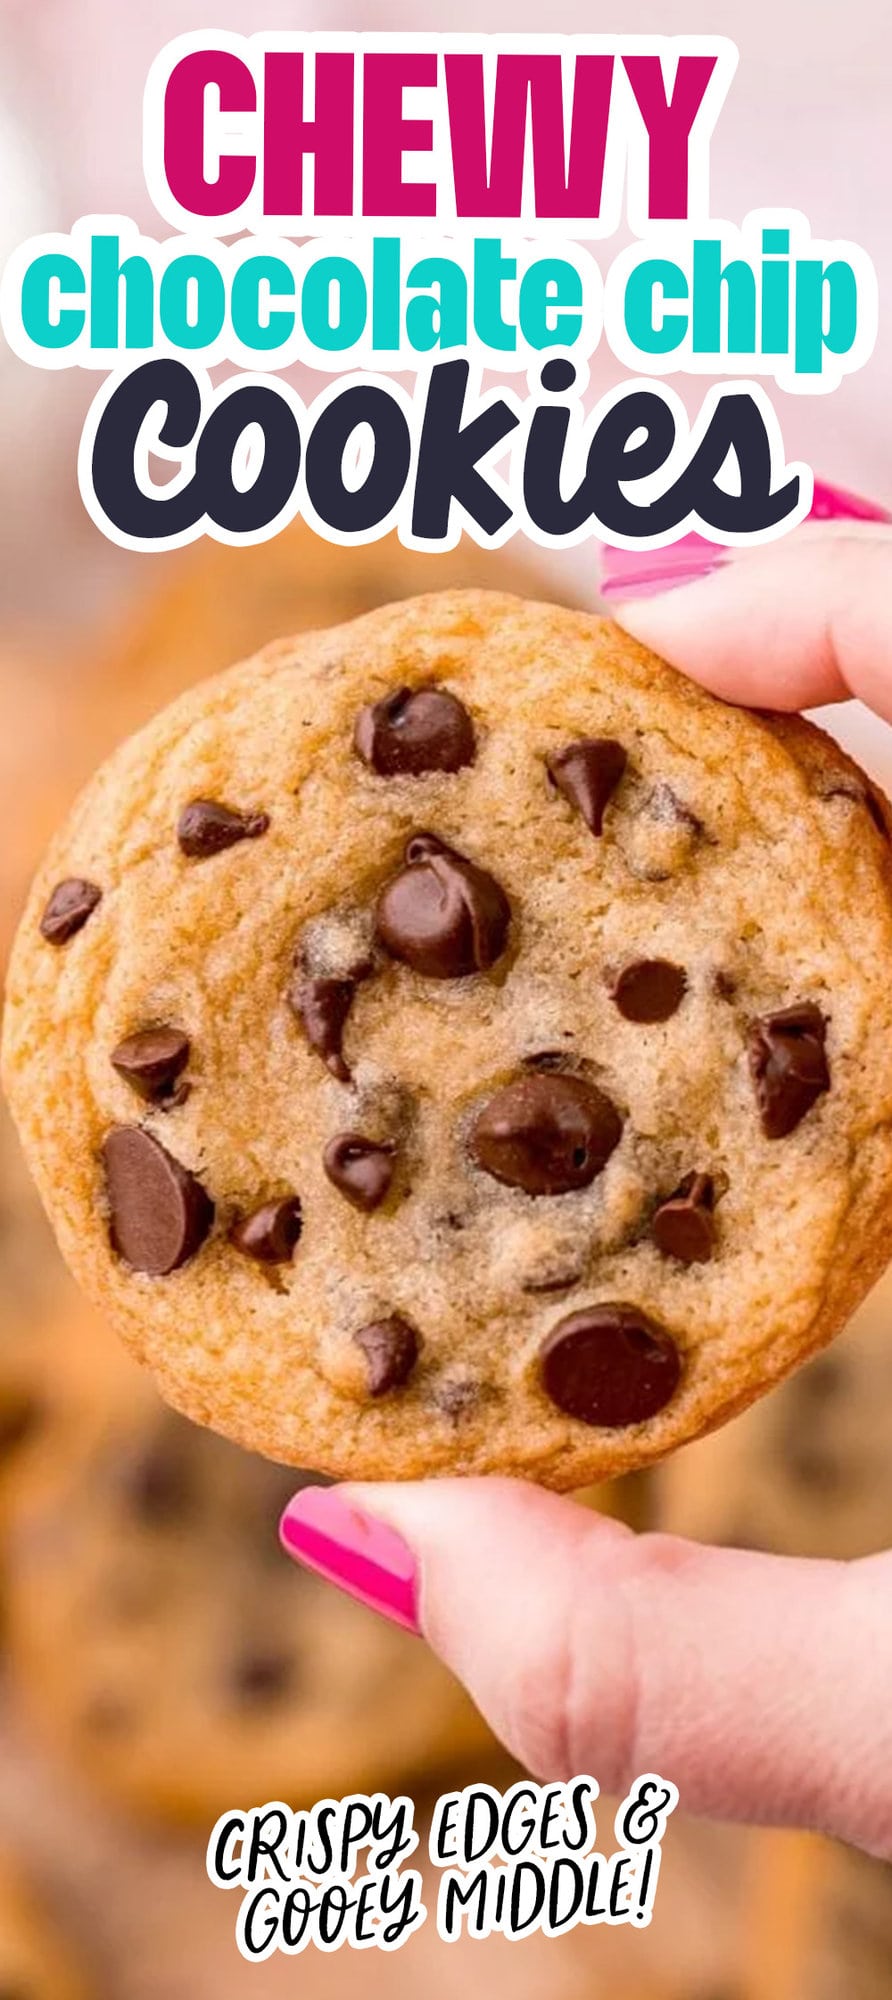 a hand holding a chocolate chip cookie